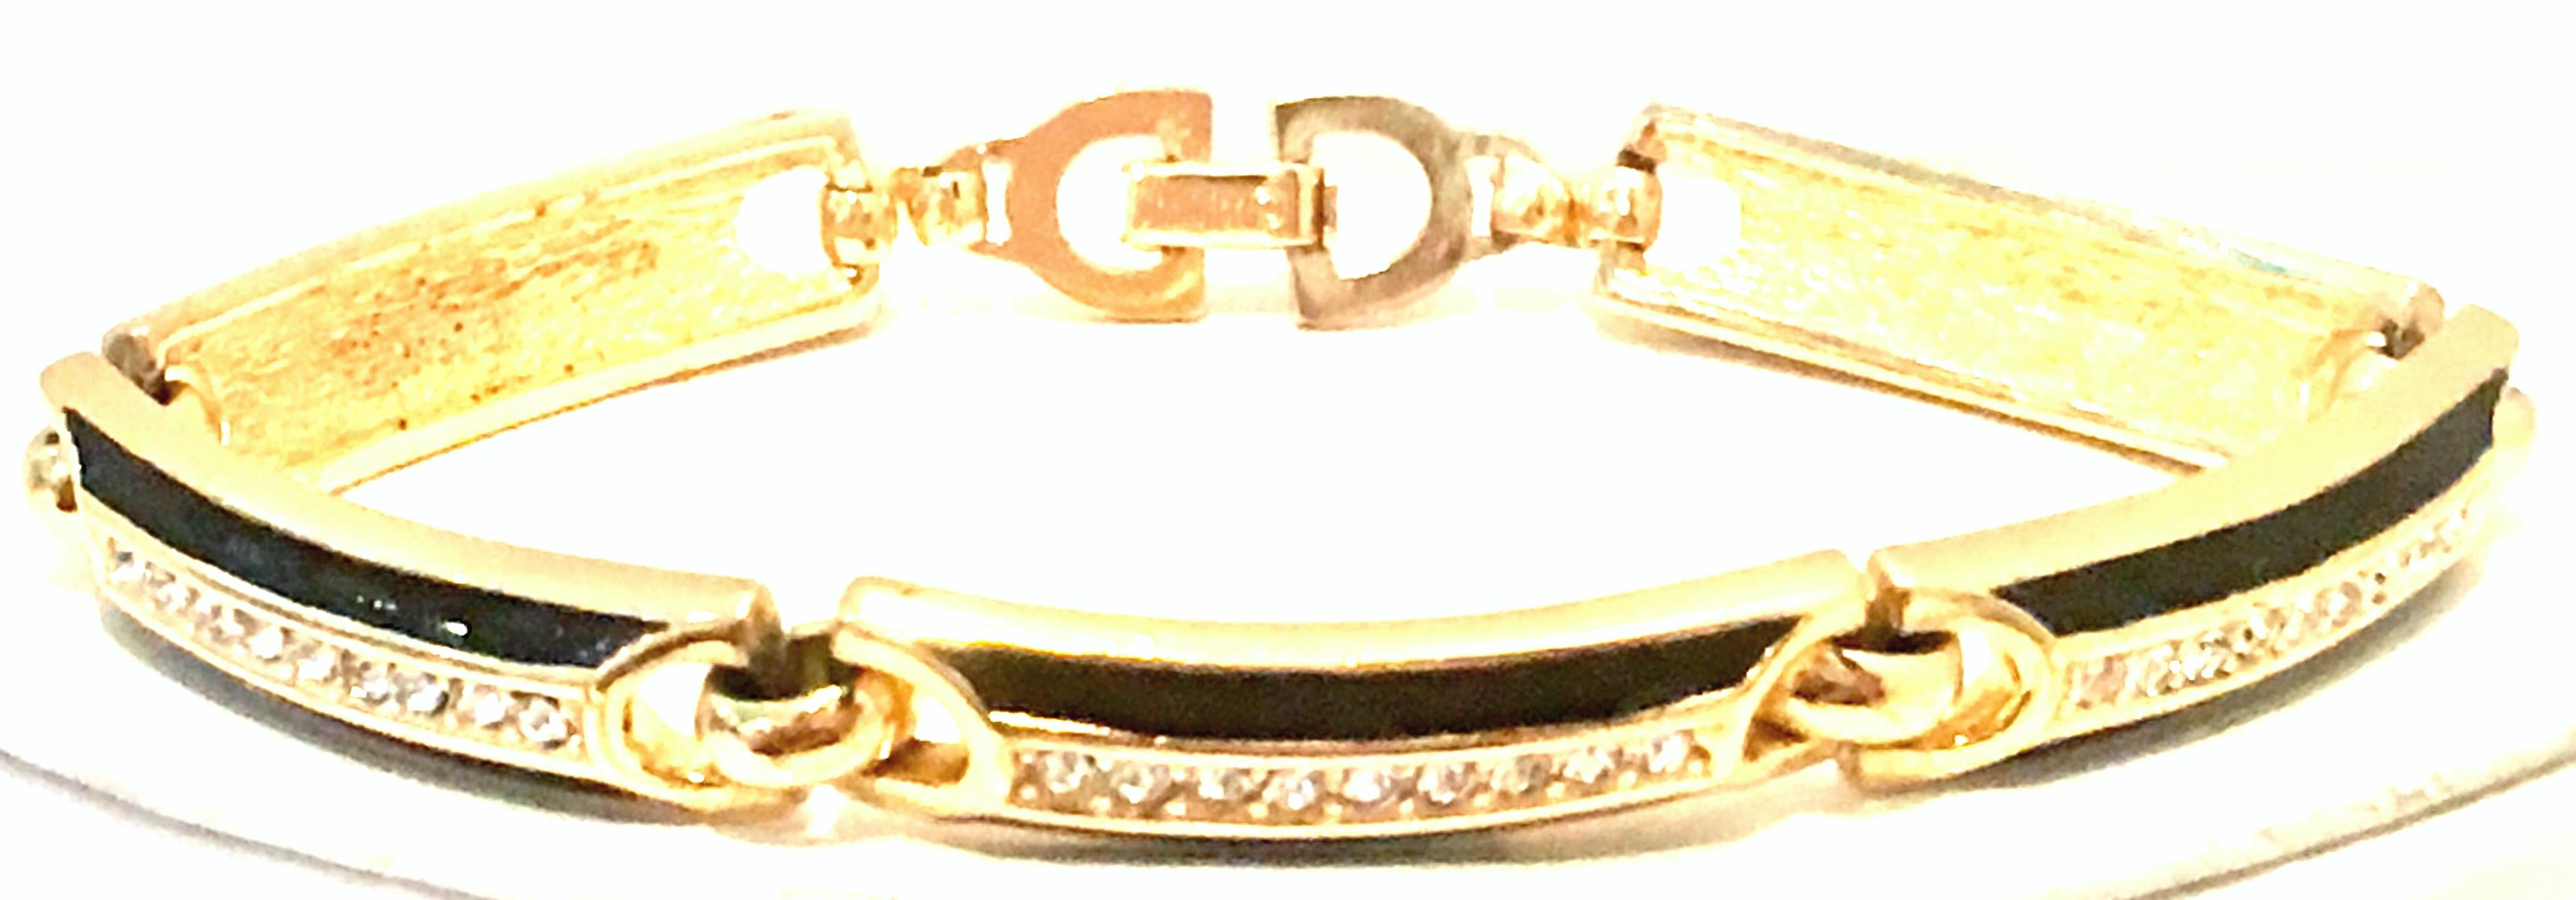 20th Century Gold Plate, Enamel & Swarovski Crystal Link Bracelet By, Christian Dior. This gold plate, black enamel and Swarovski crystal five curved link bracelet features brilliant colorless pave set crystal stones with the iconic 